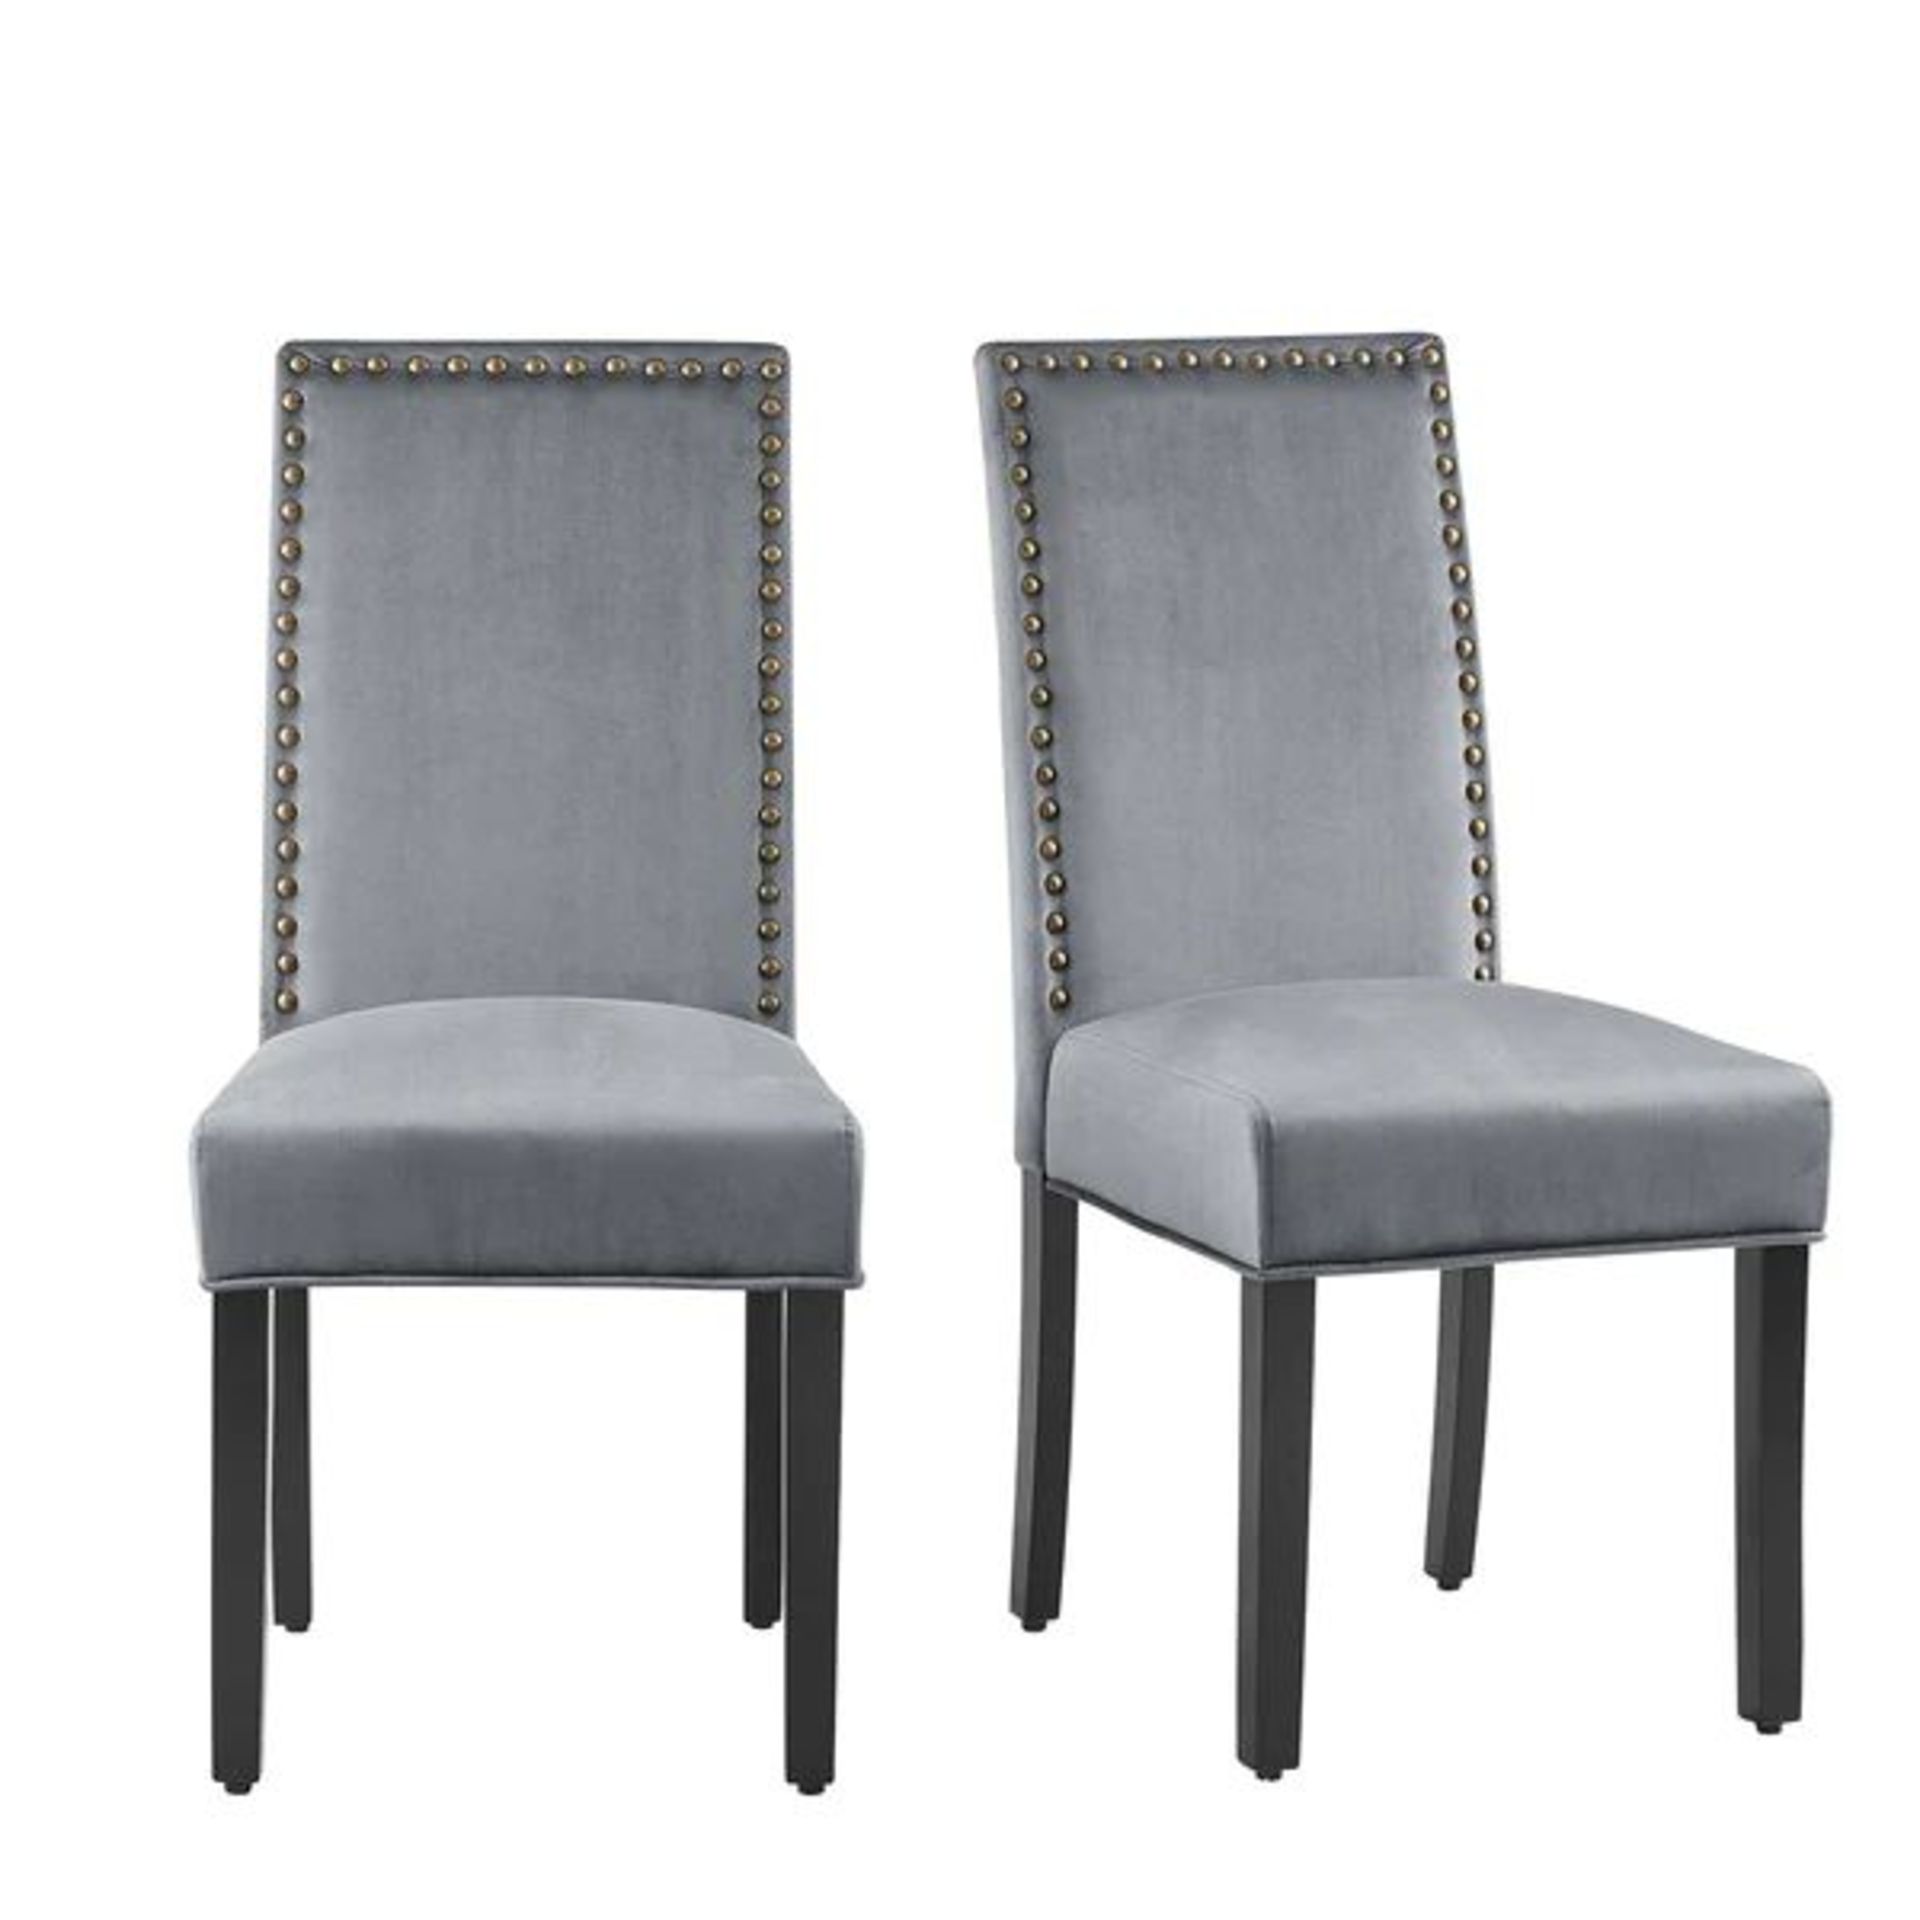 Maidwell Set of 2 Grey Velvet Dining Chairs. - ER30. RRP £219.99. With a sleek sihoutte, our - Image 2 of 2